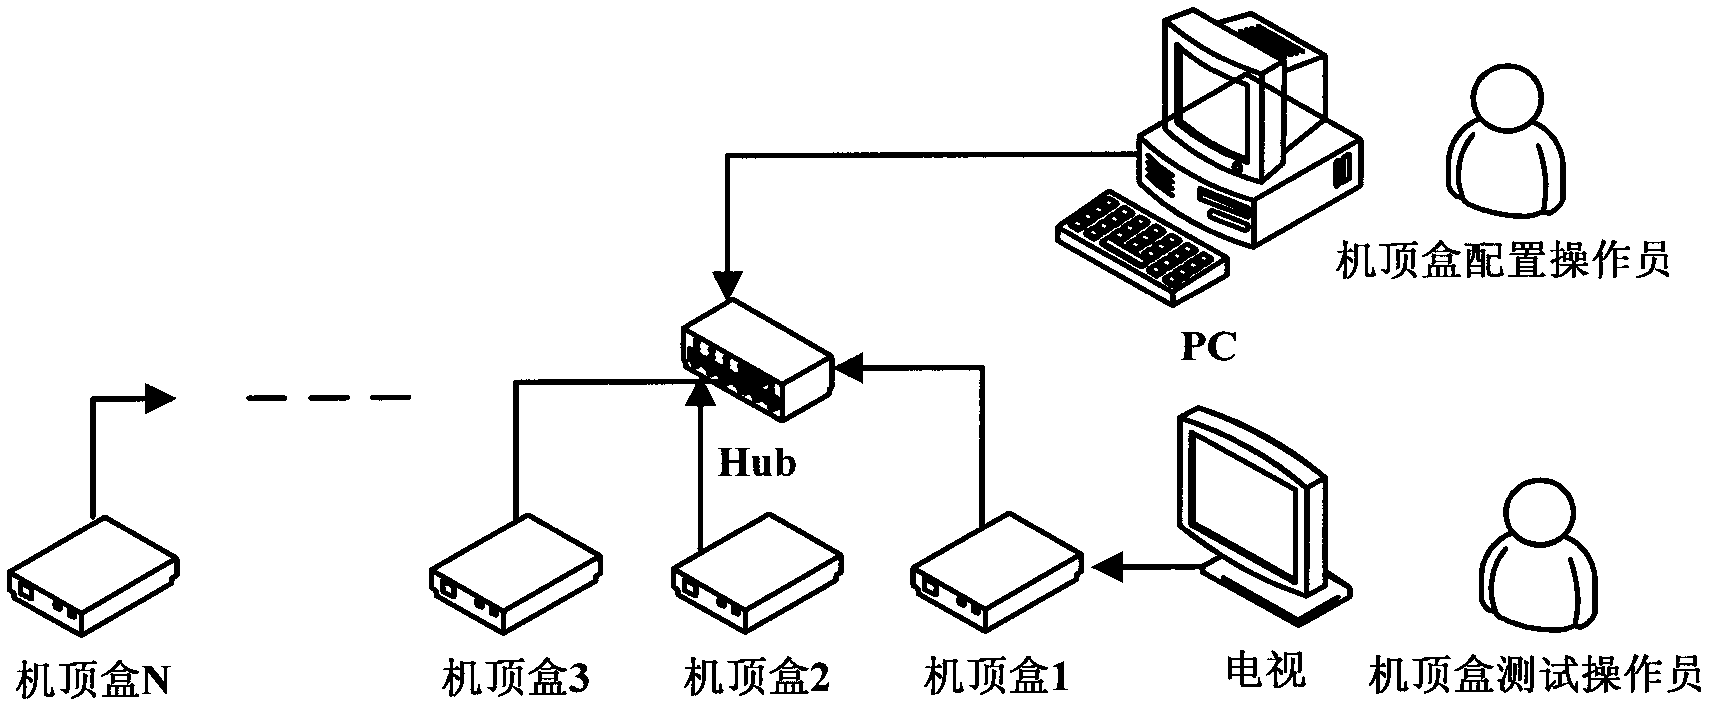 System configuration and test method in the production of iptv set-top box